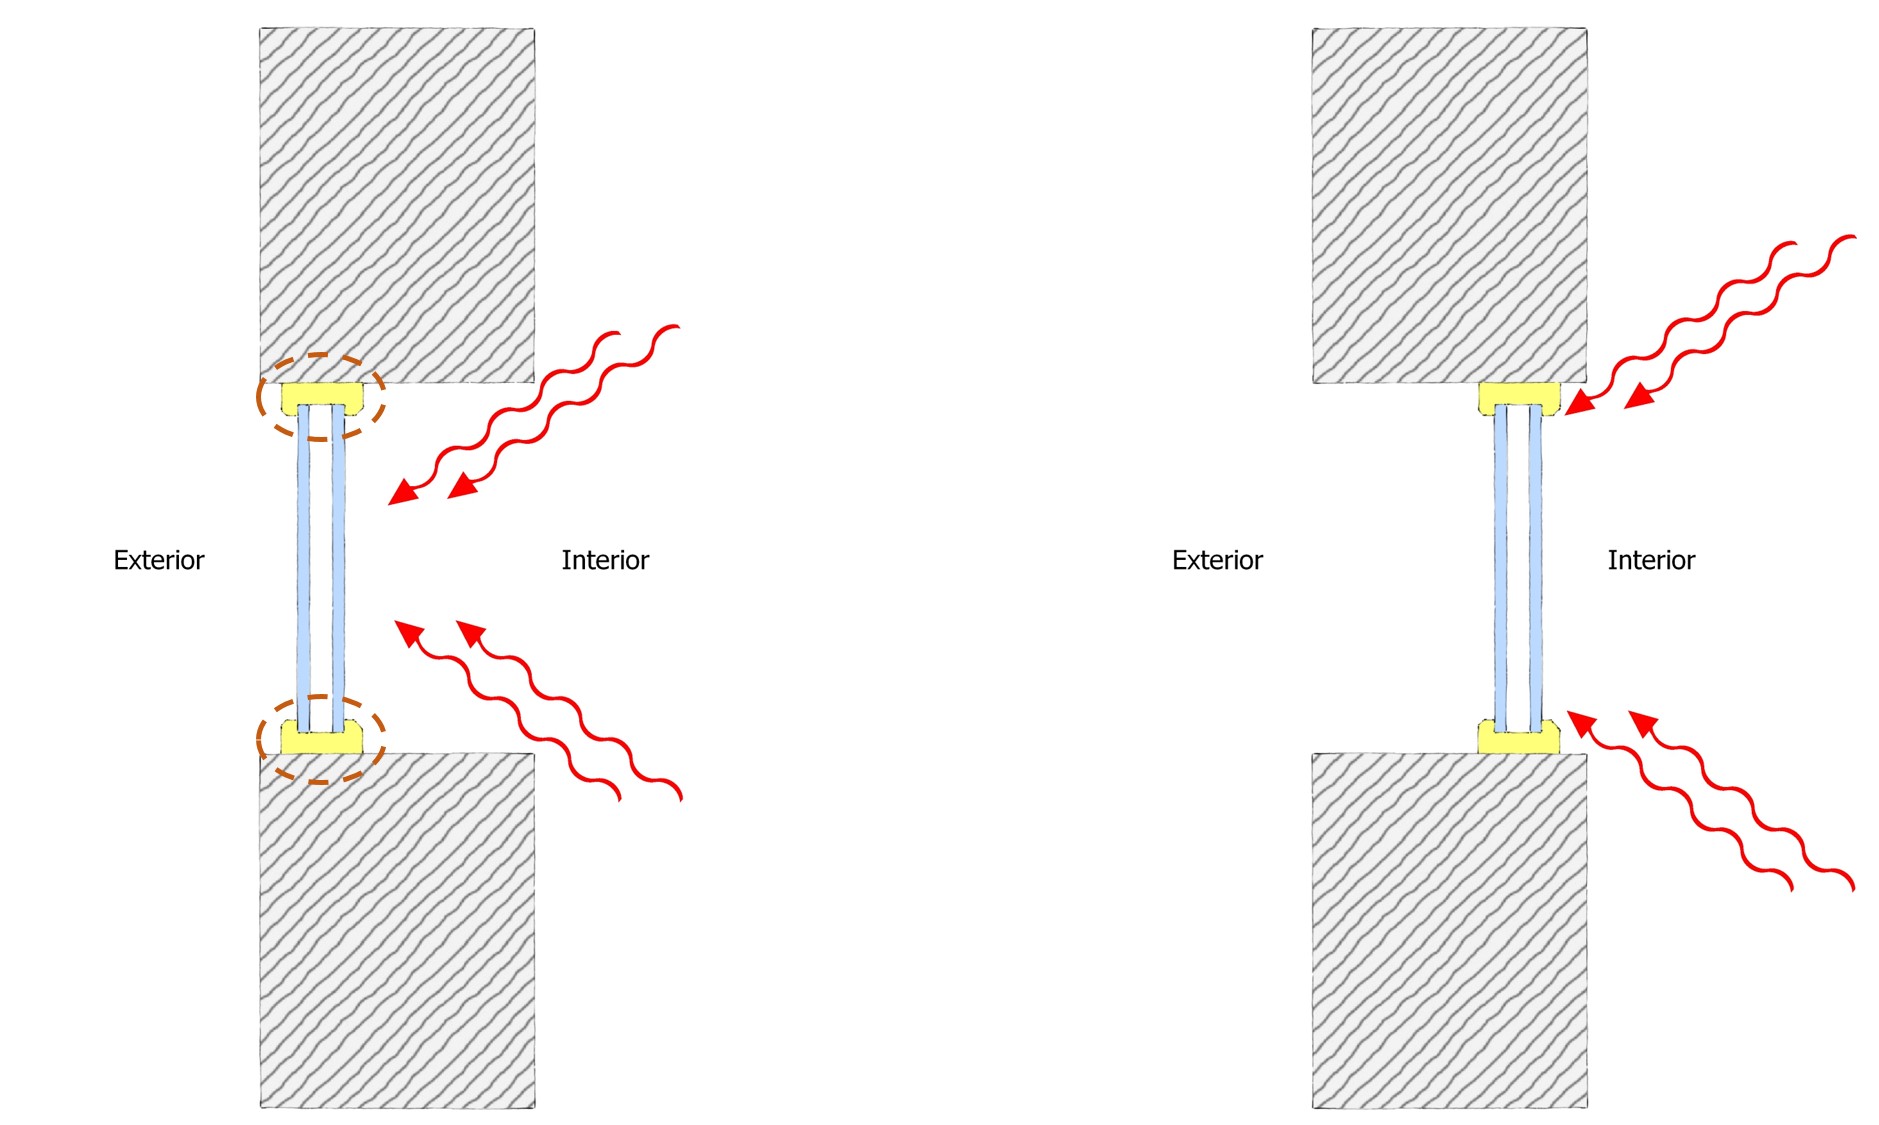 As seen on the top diagram, some of the interior net radiation heat exchange does not reach the perimeter of the window (shown with circles) since the radiation is intercepted by the recessed sections of the wall, thus reducing the condensation resistance of the window compared to the bottom diagram